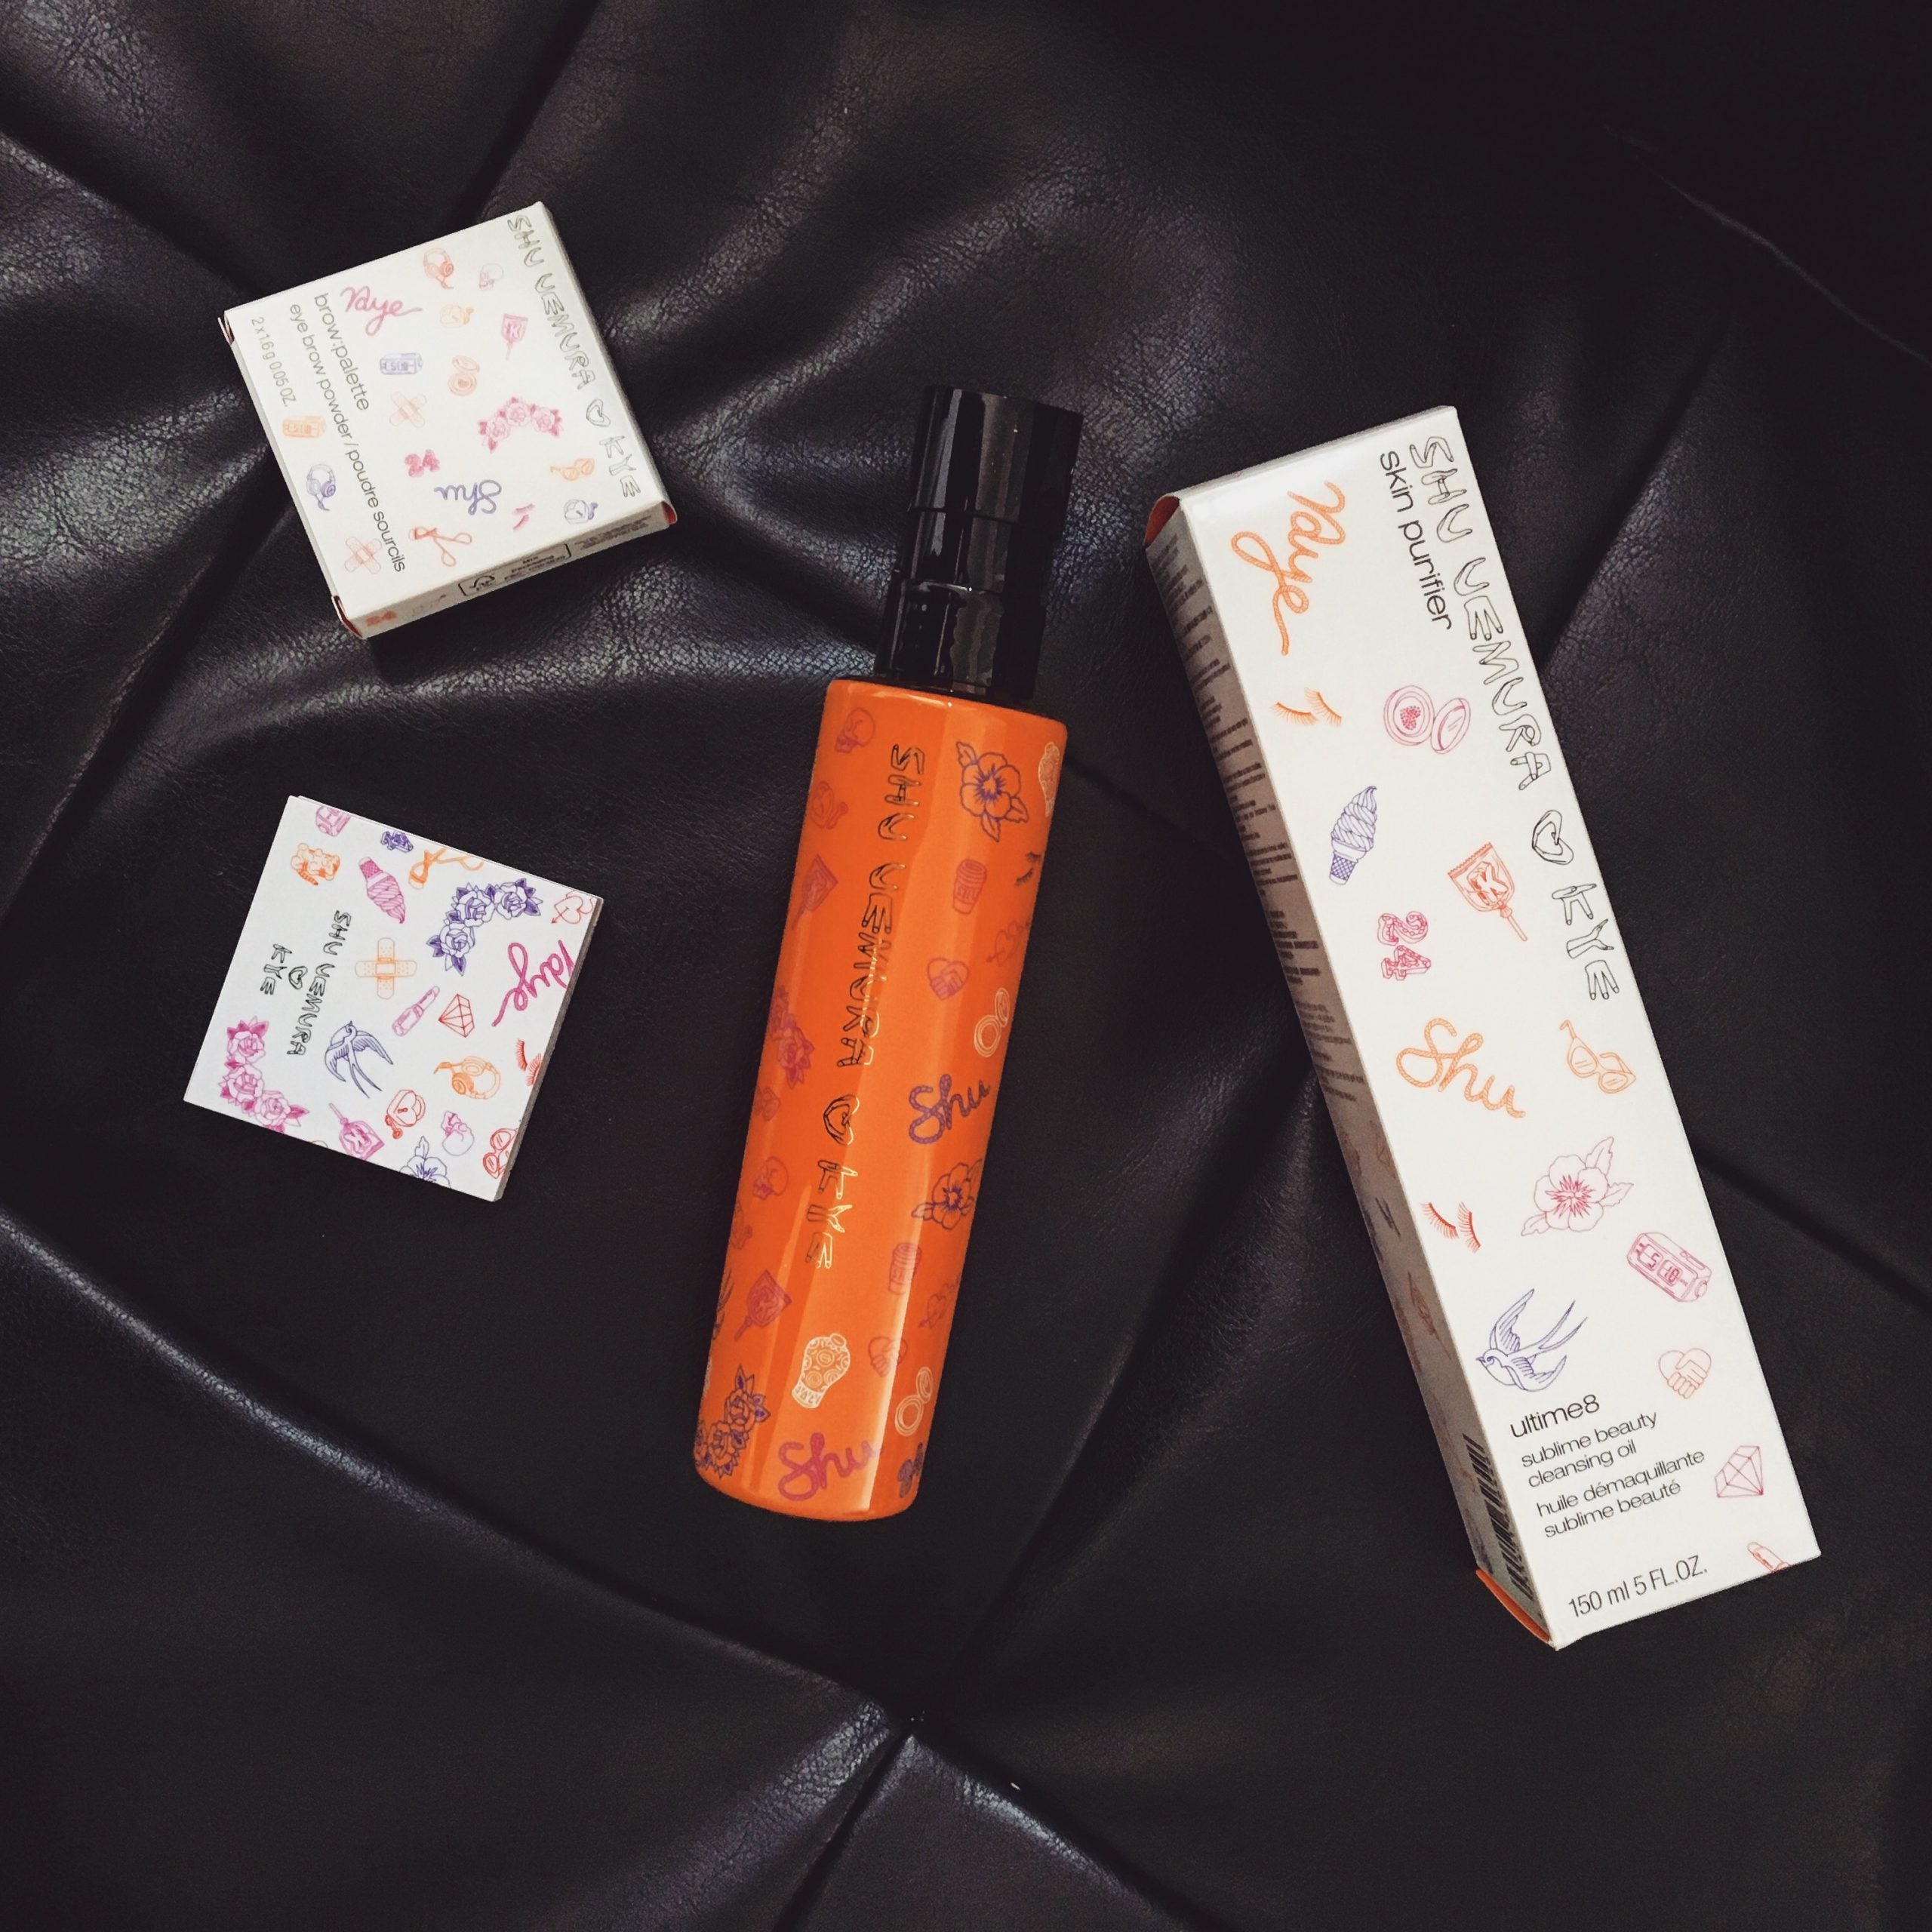 Makeup, Skincare Review: SHU Uemura x Kye Limited-Edition Artist Collection, Brow Palette, Ultime8 Cleansing Oil